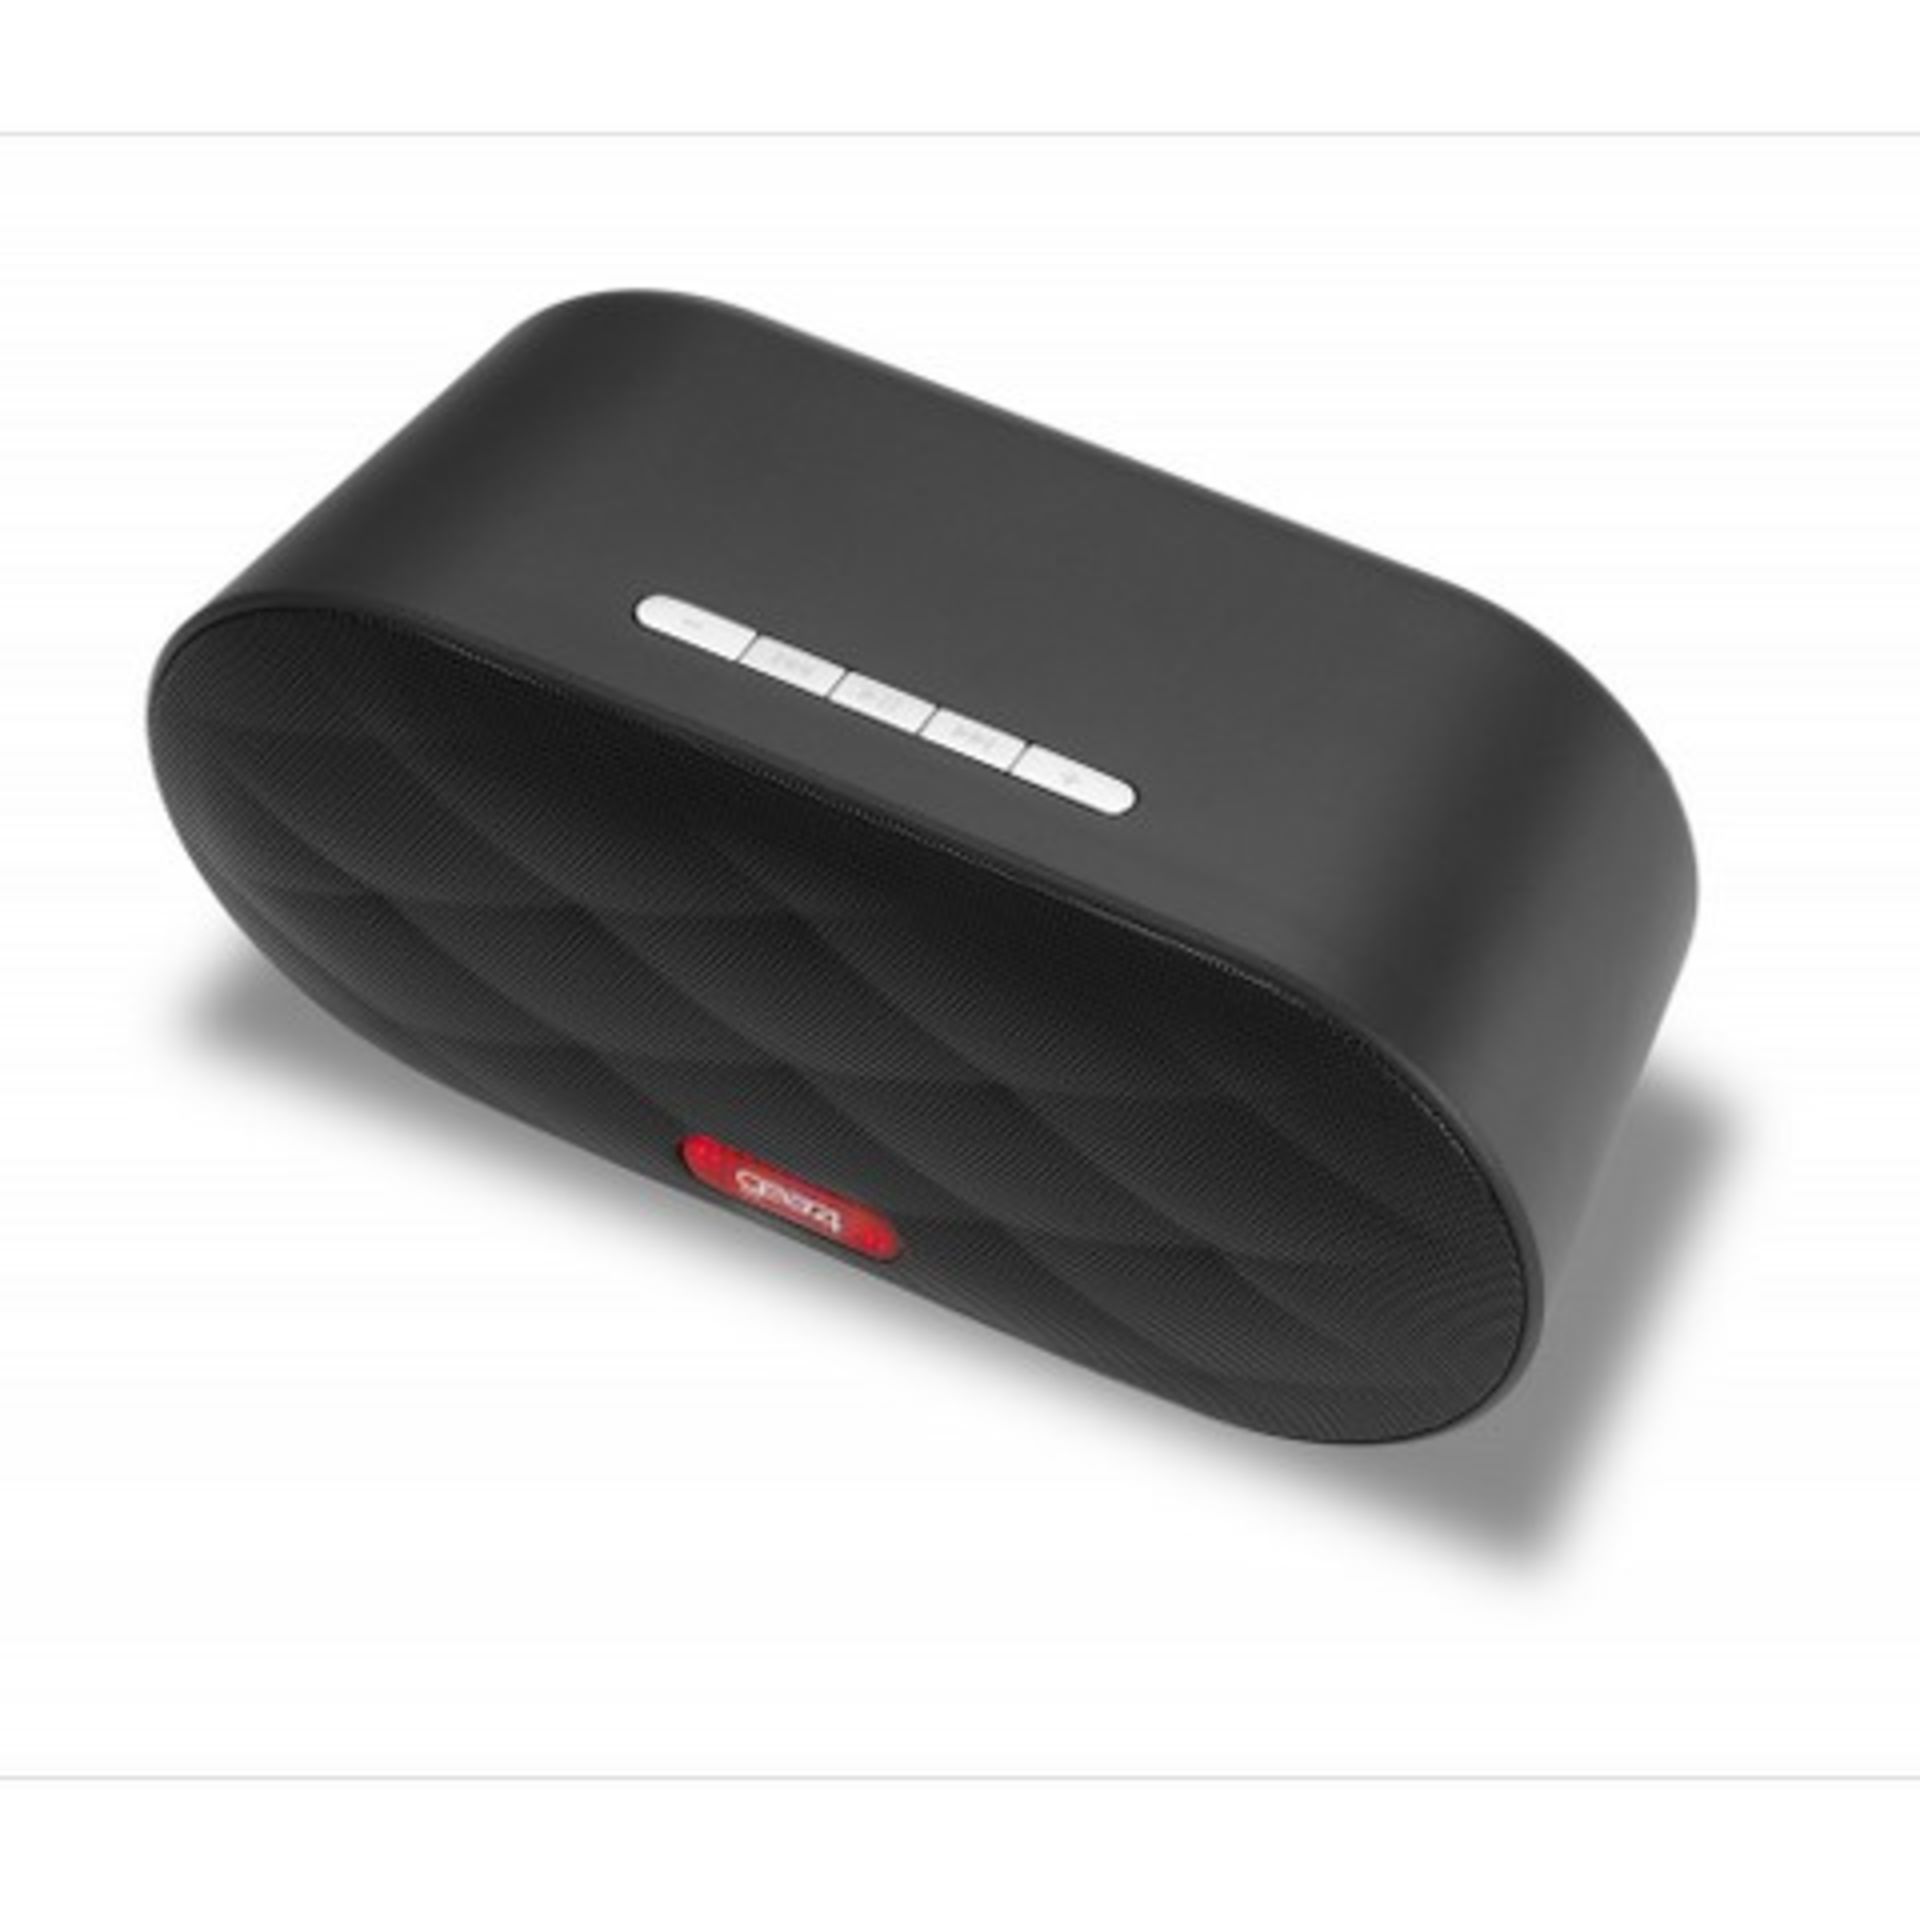 V Brand New Gear4 XOME Stereo Bluetooth Speaker - RRP £79.99 - Stream Music From Bluetooth Devices - Image 2 of 3